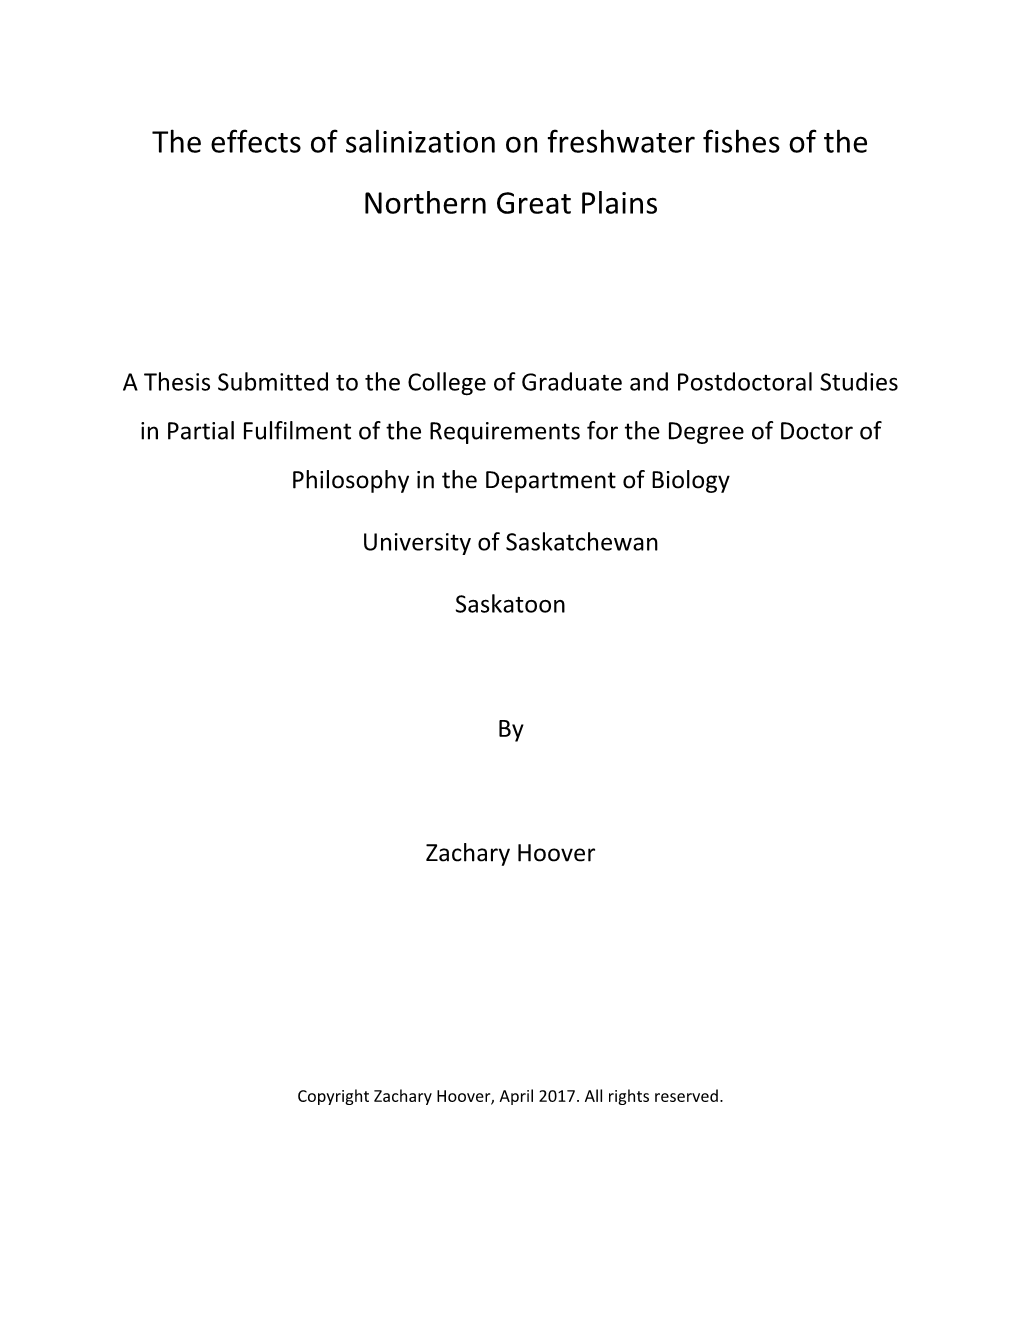 The Effects of Salinization on Freshwater Fishes of the Northern Great Plains